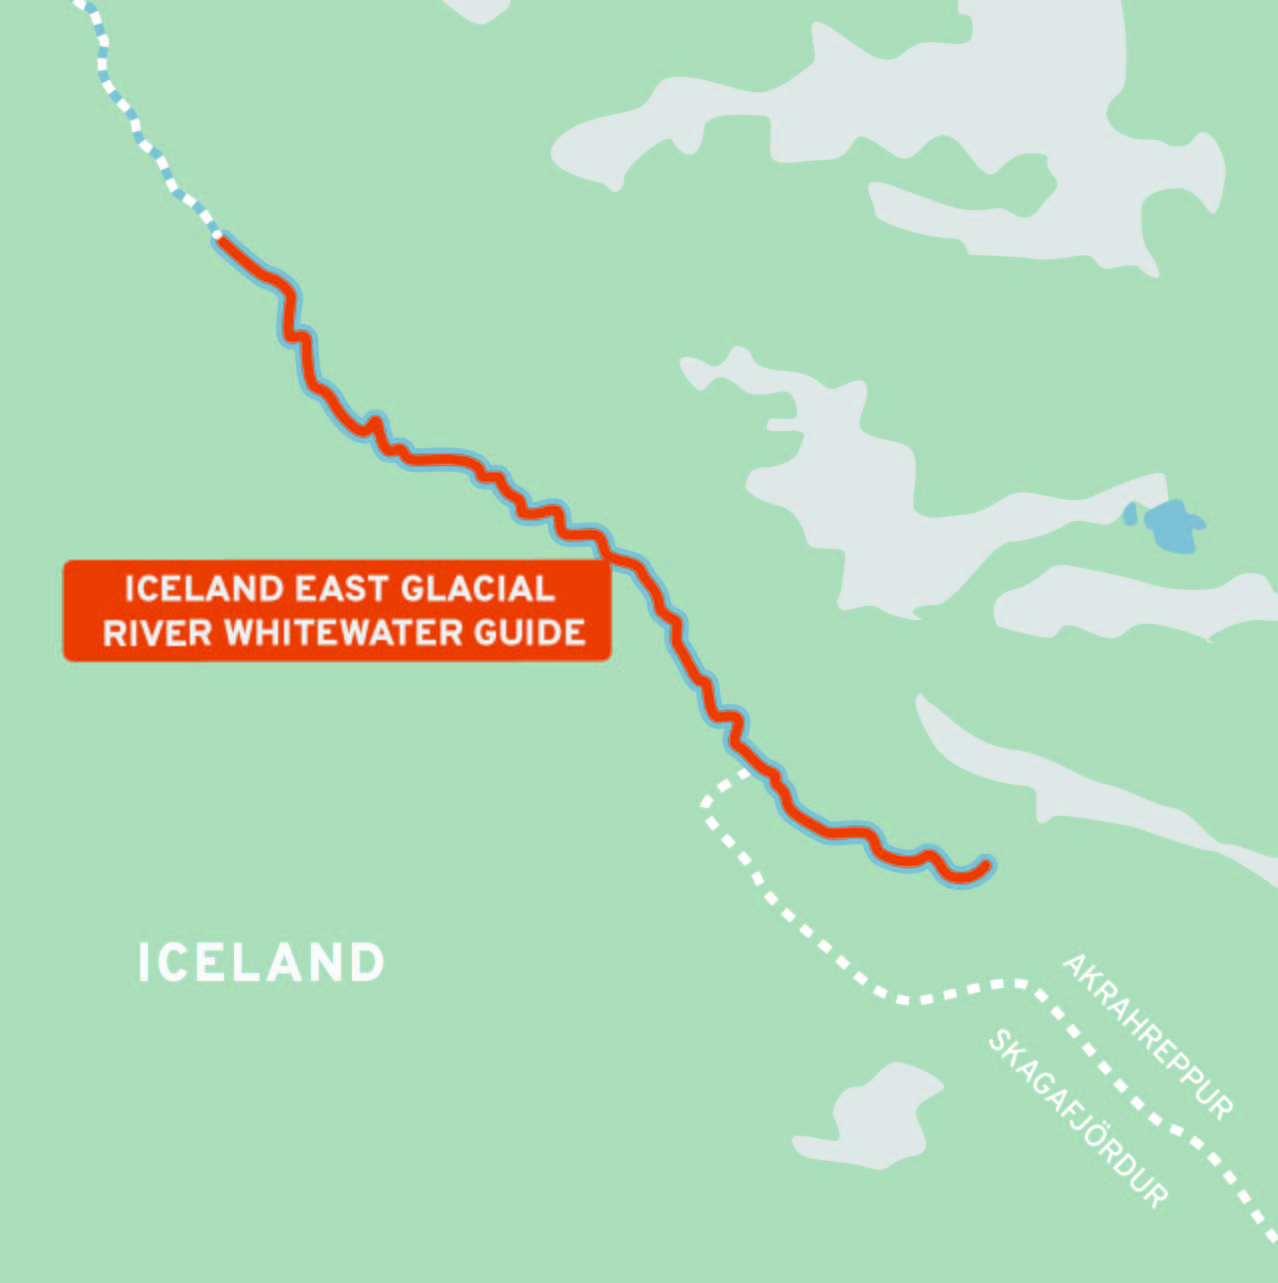 Iceland East Glacial River Whitewater Guide Map